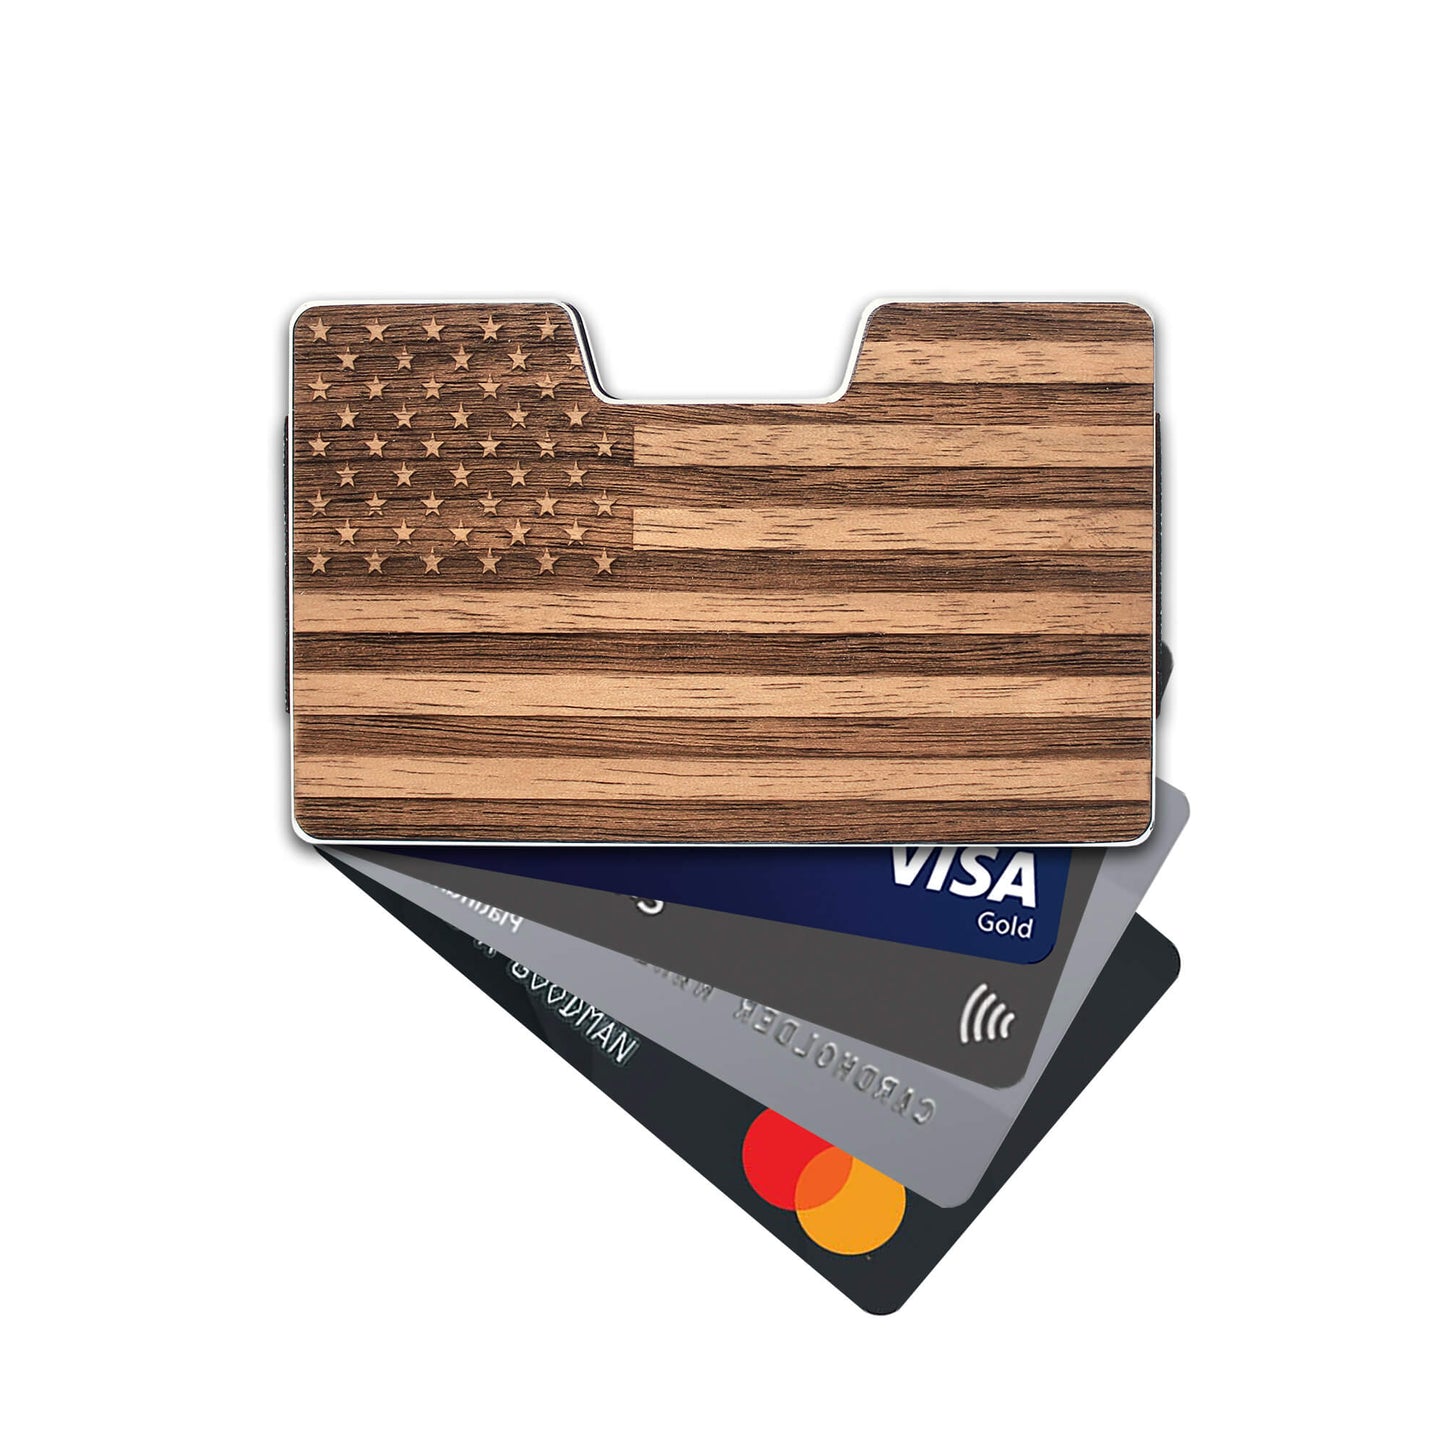 US flag - Wooden Credit Card Holder with Money Clip Wallet